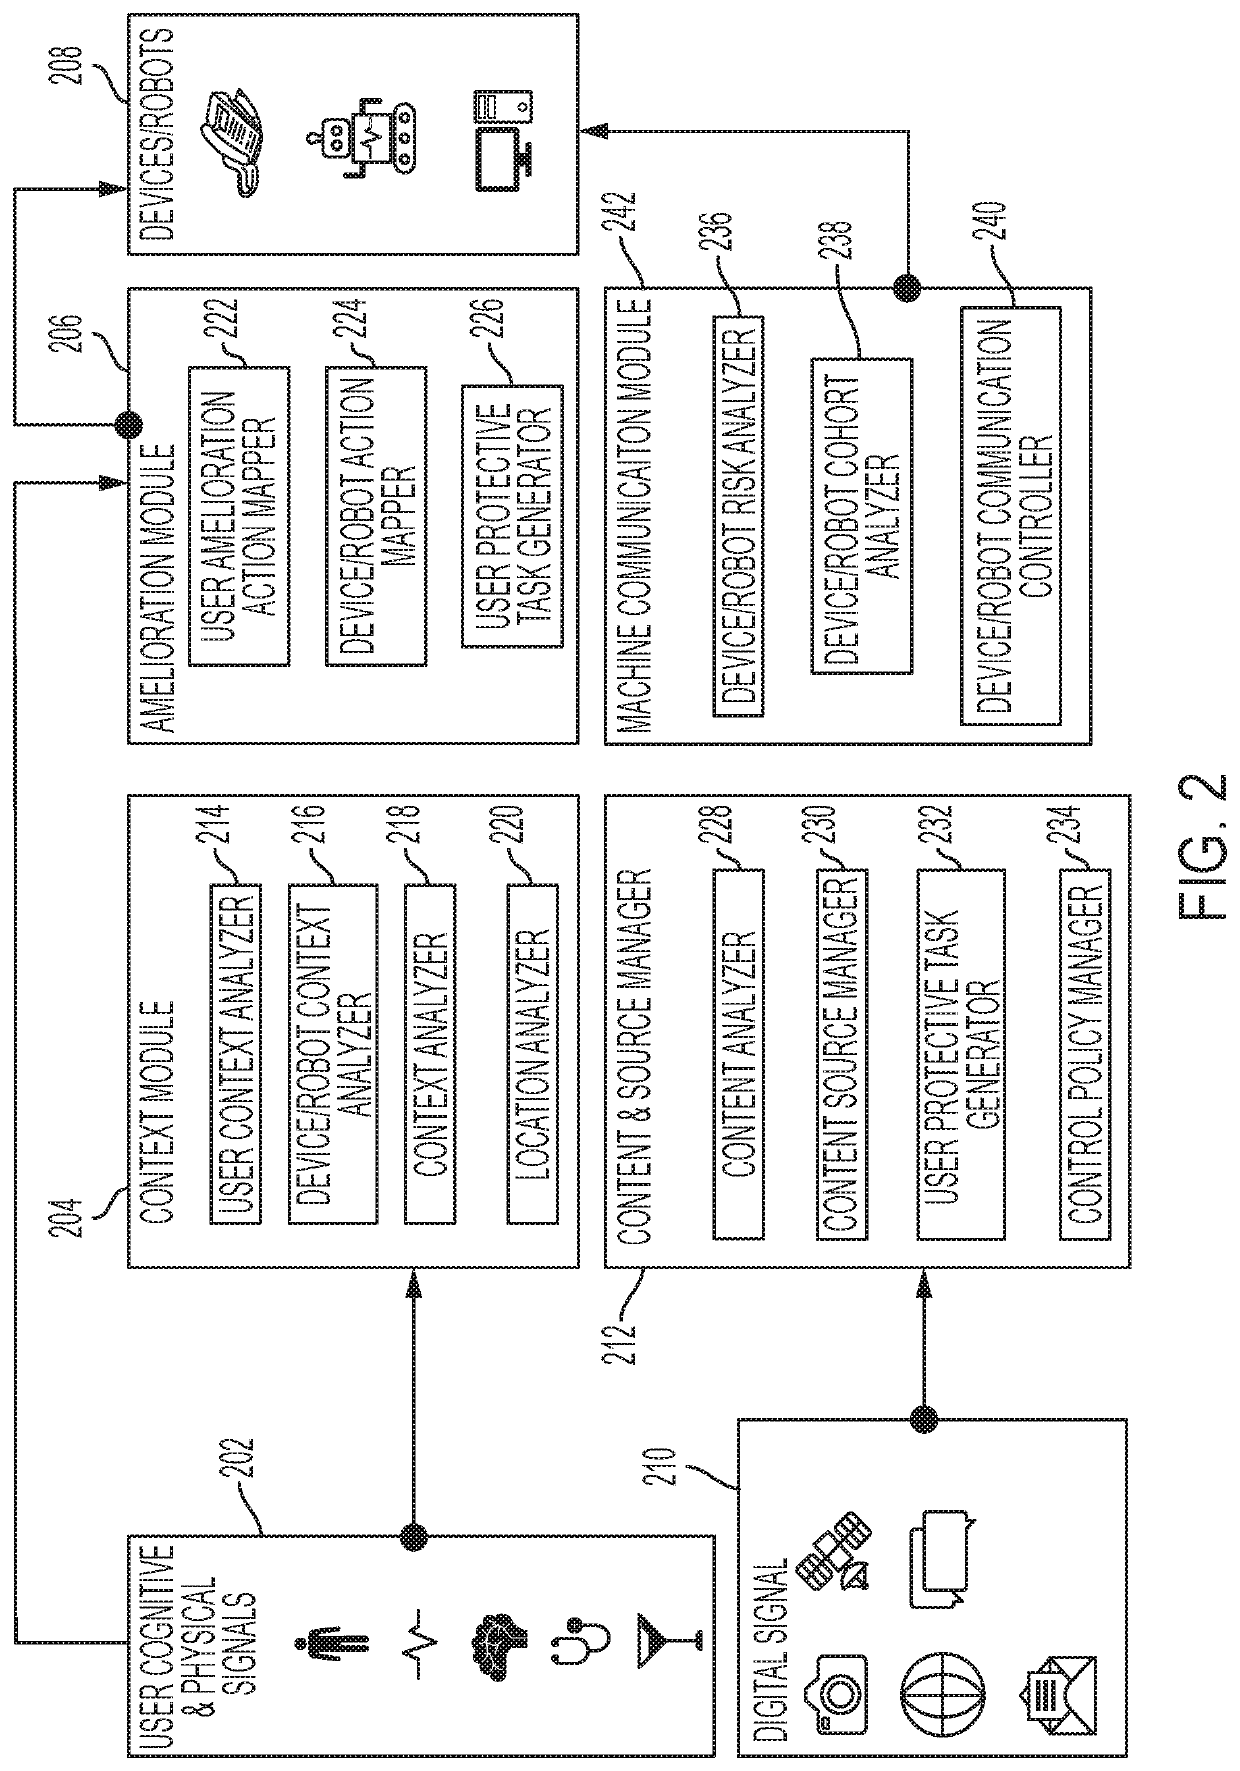 Device protection based on prediction and contextual analysis